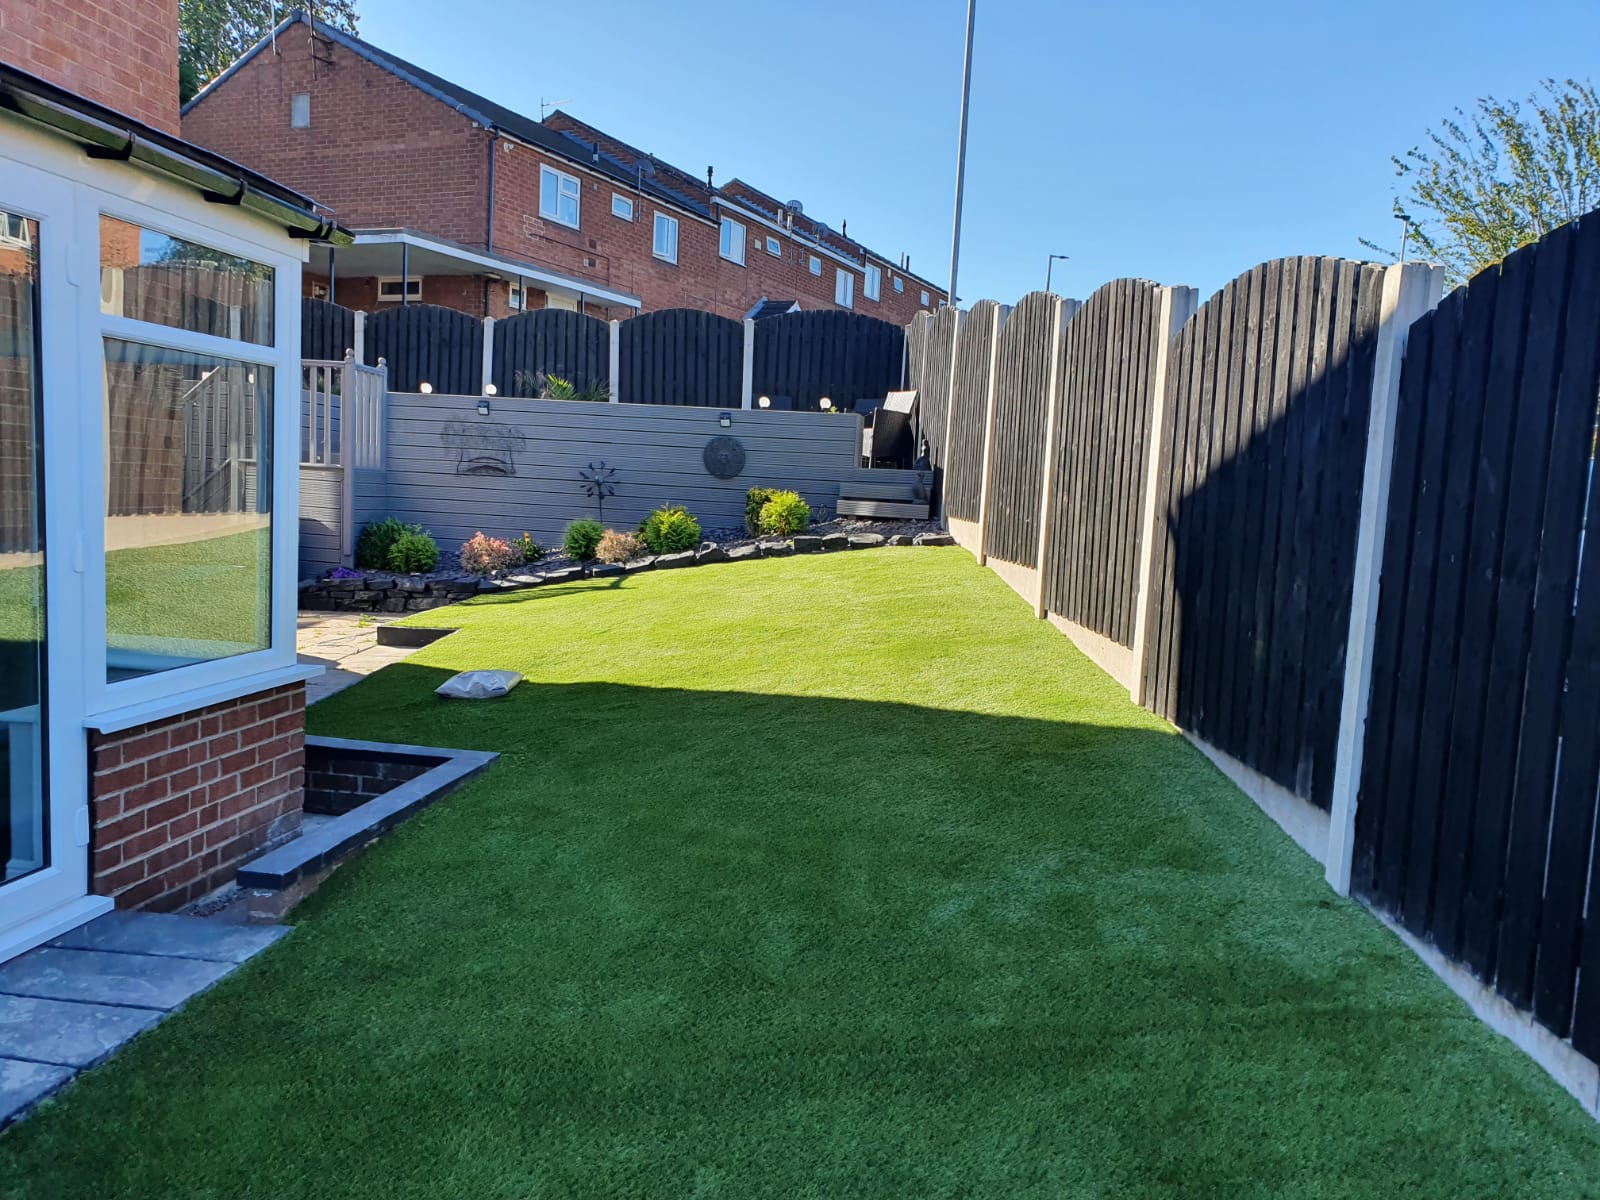 The finished artificial grass lawn in a Doncaster back garden